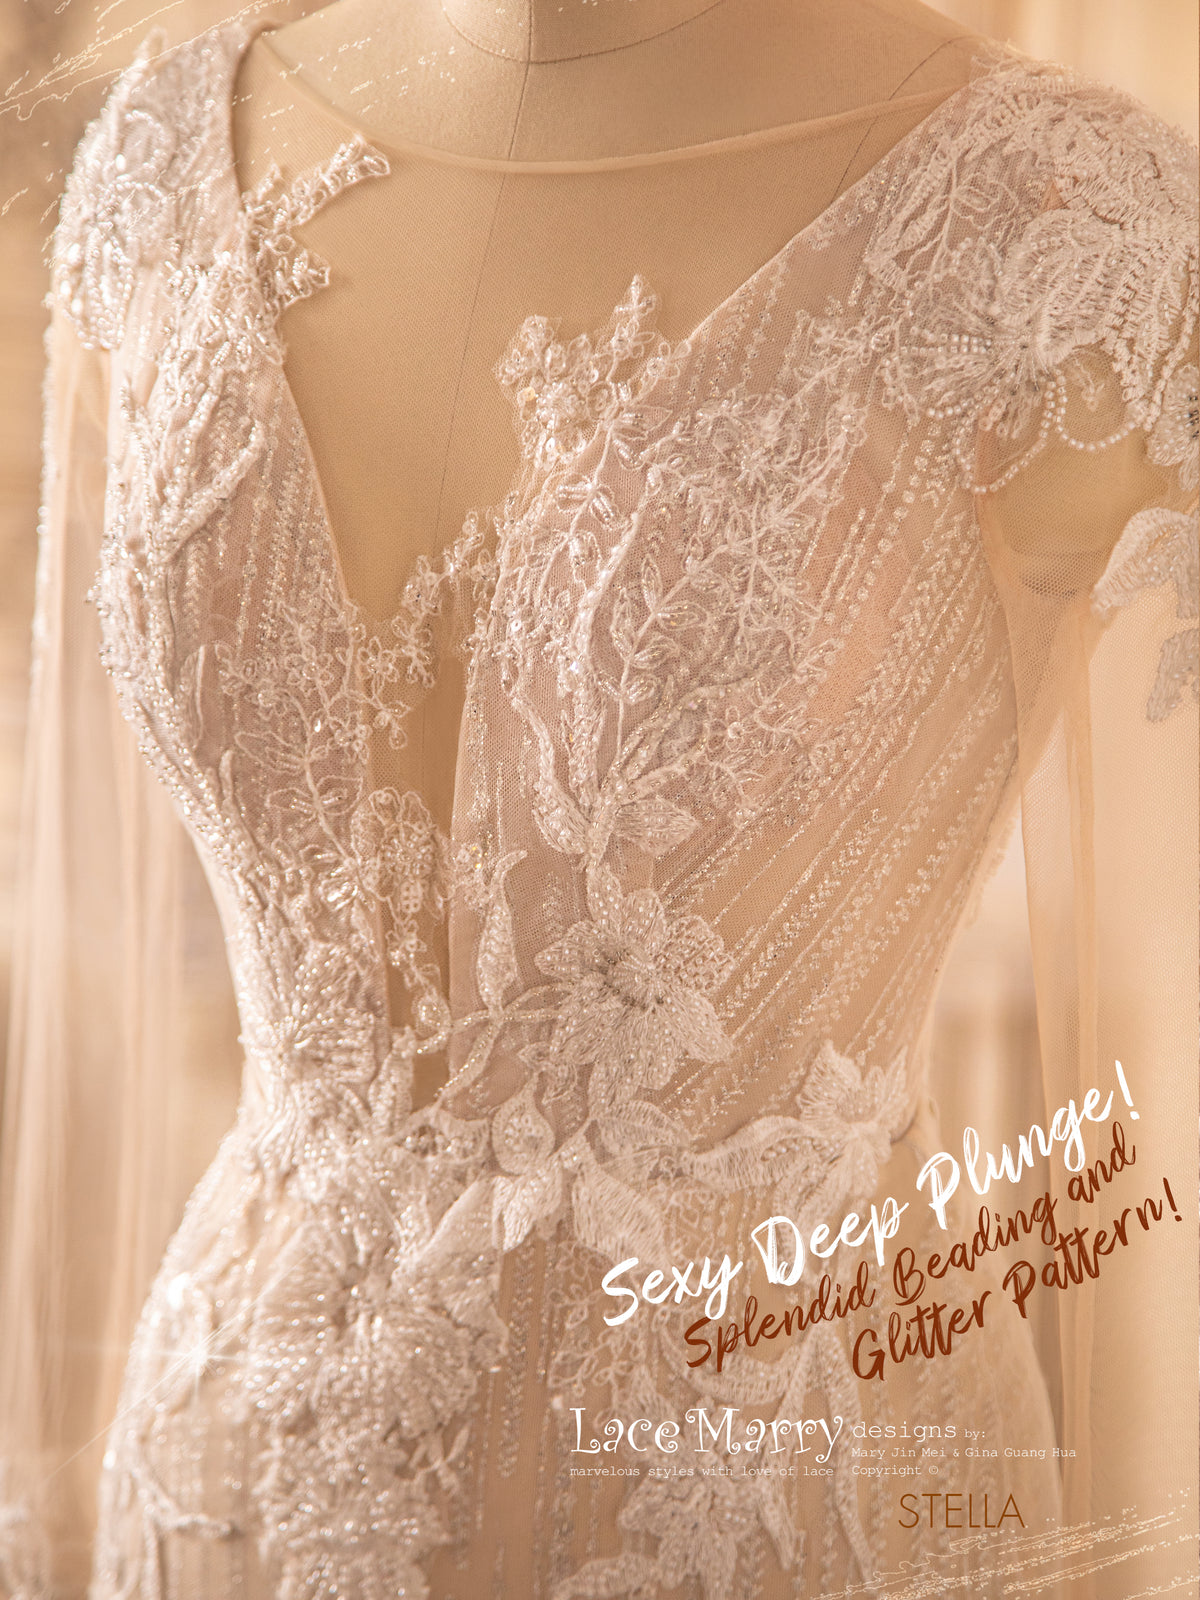 STELLA / Fitted Wedding Dress with Gorgeous Beaded Flower Appliques